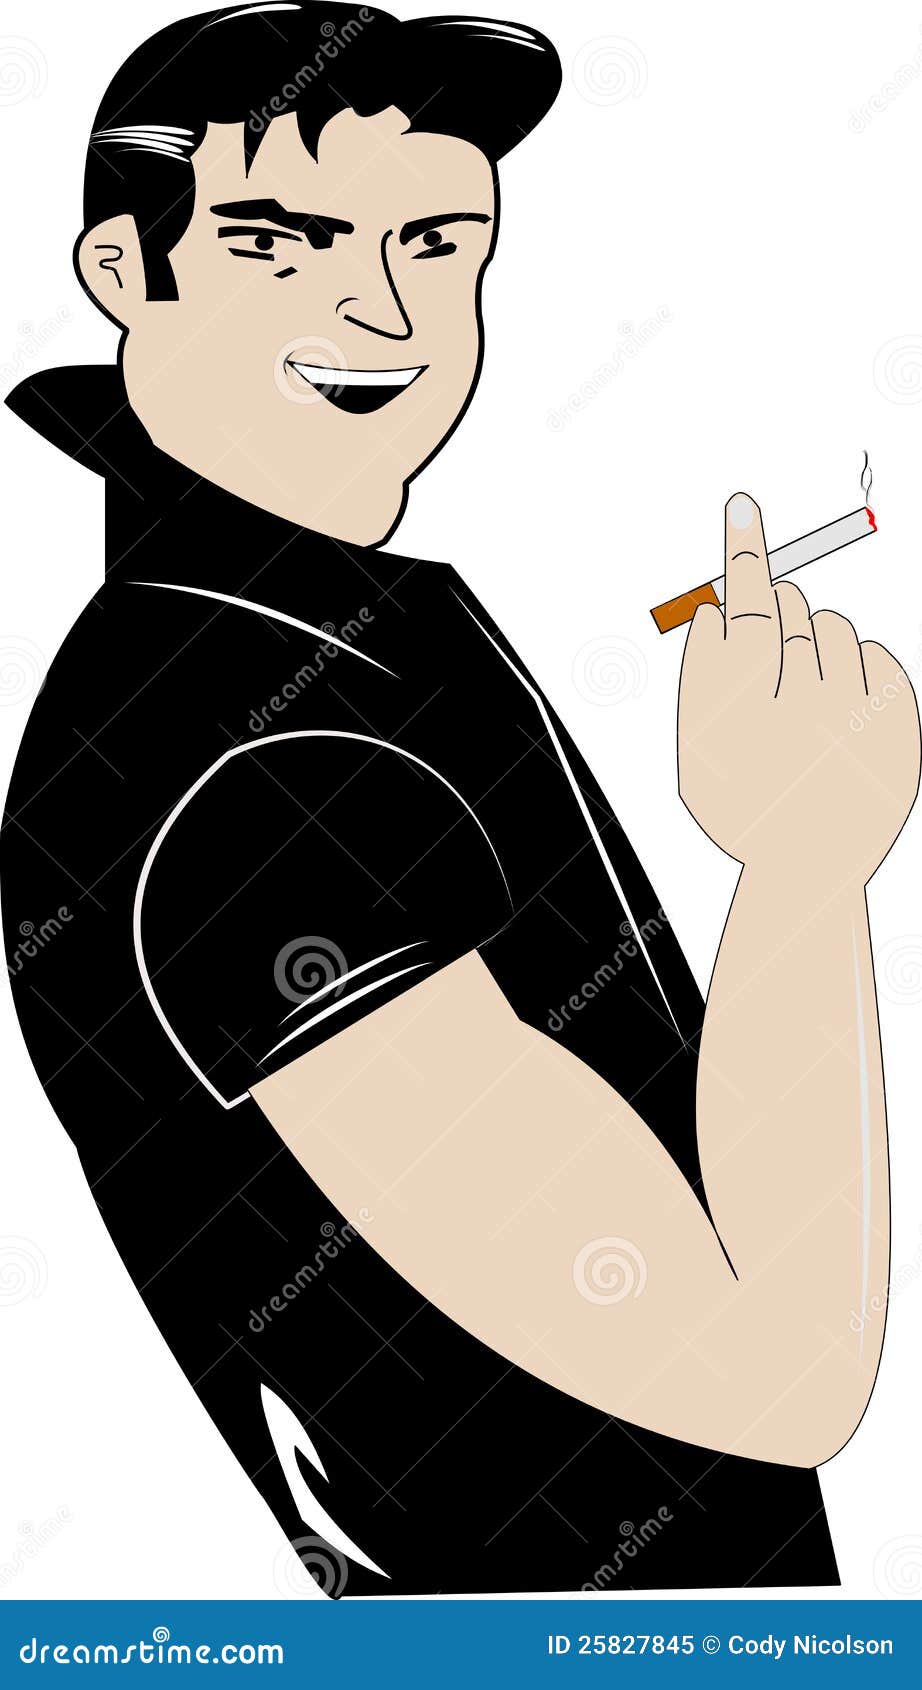 50's Greaser Royalty Free Stock Photo - Image: 25827845